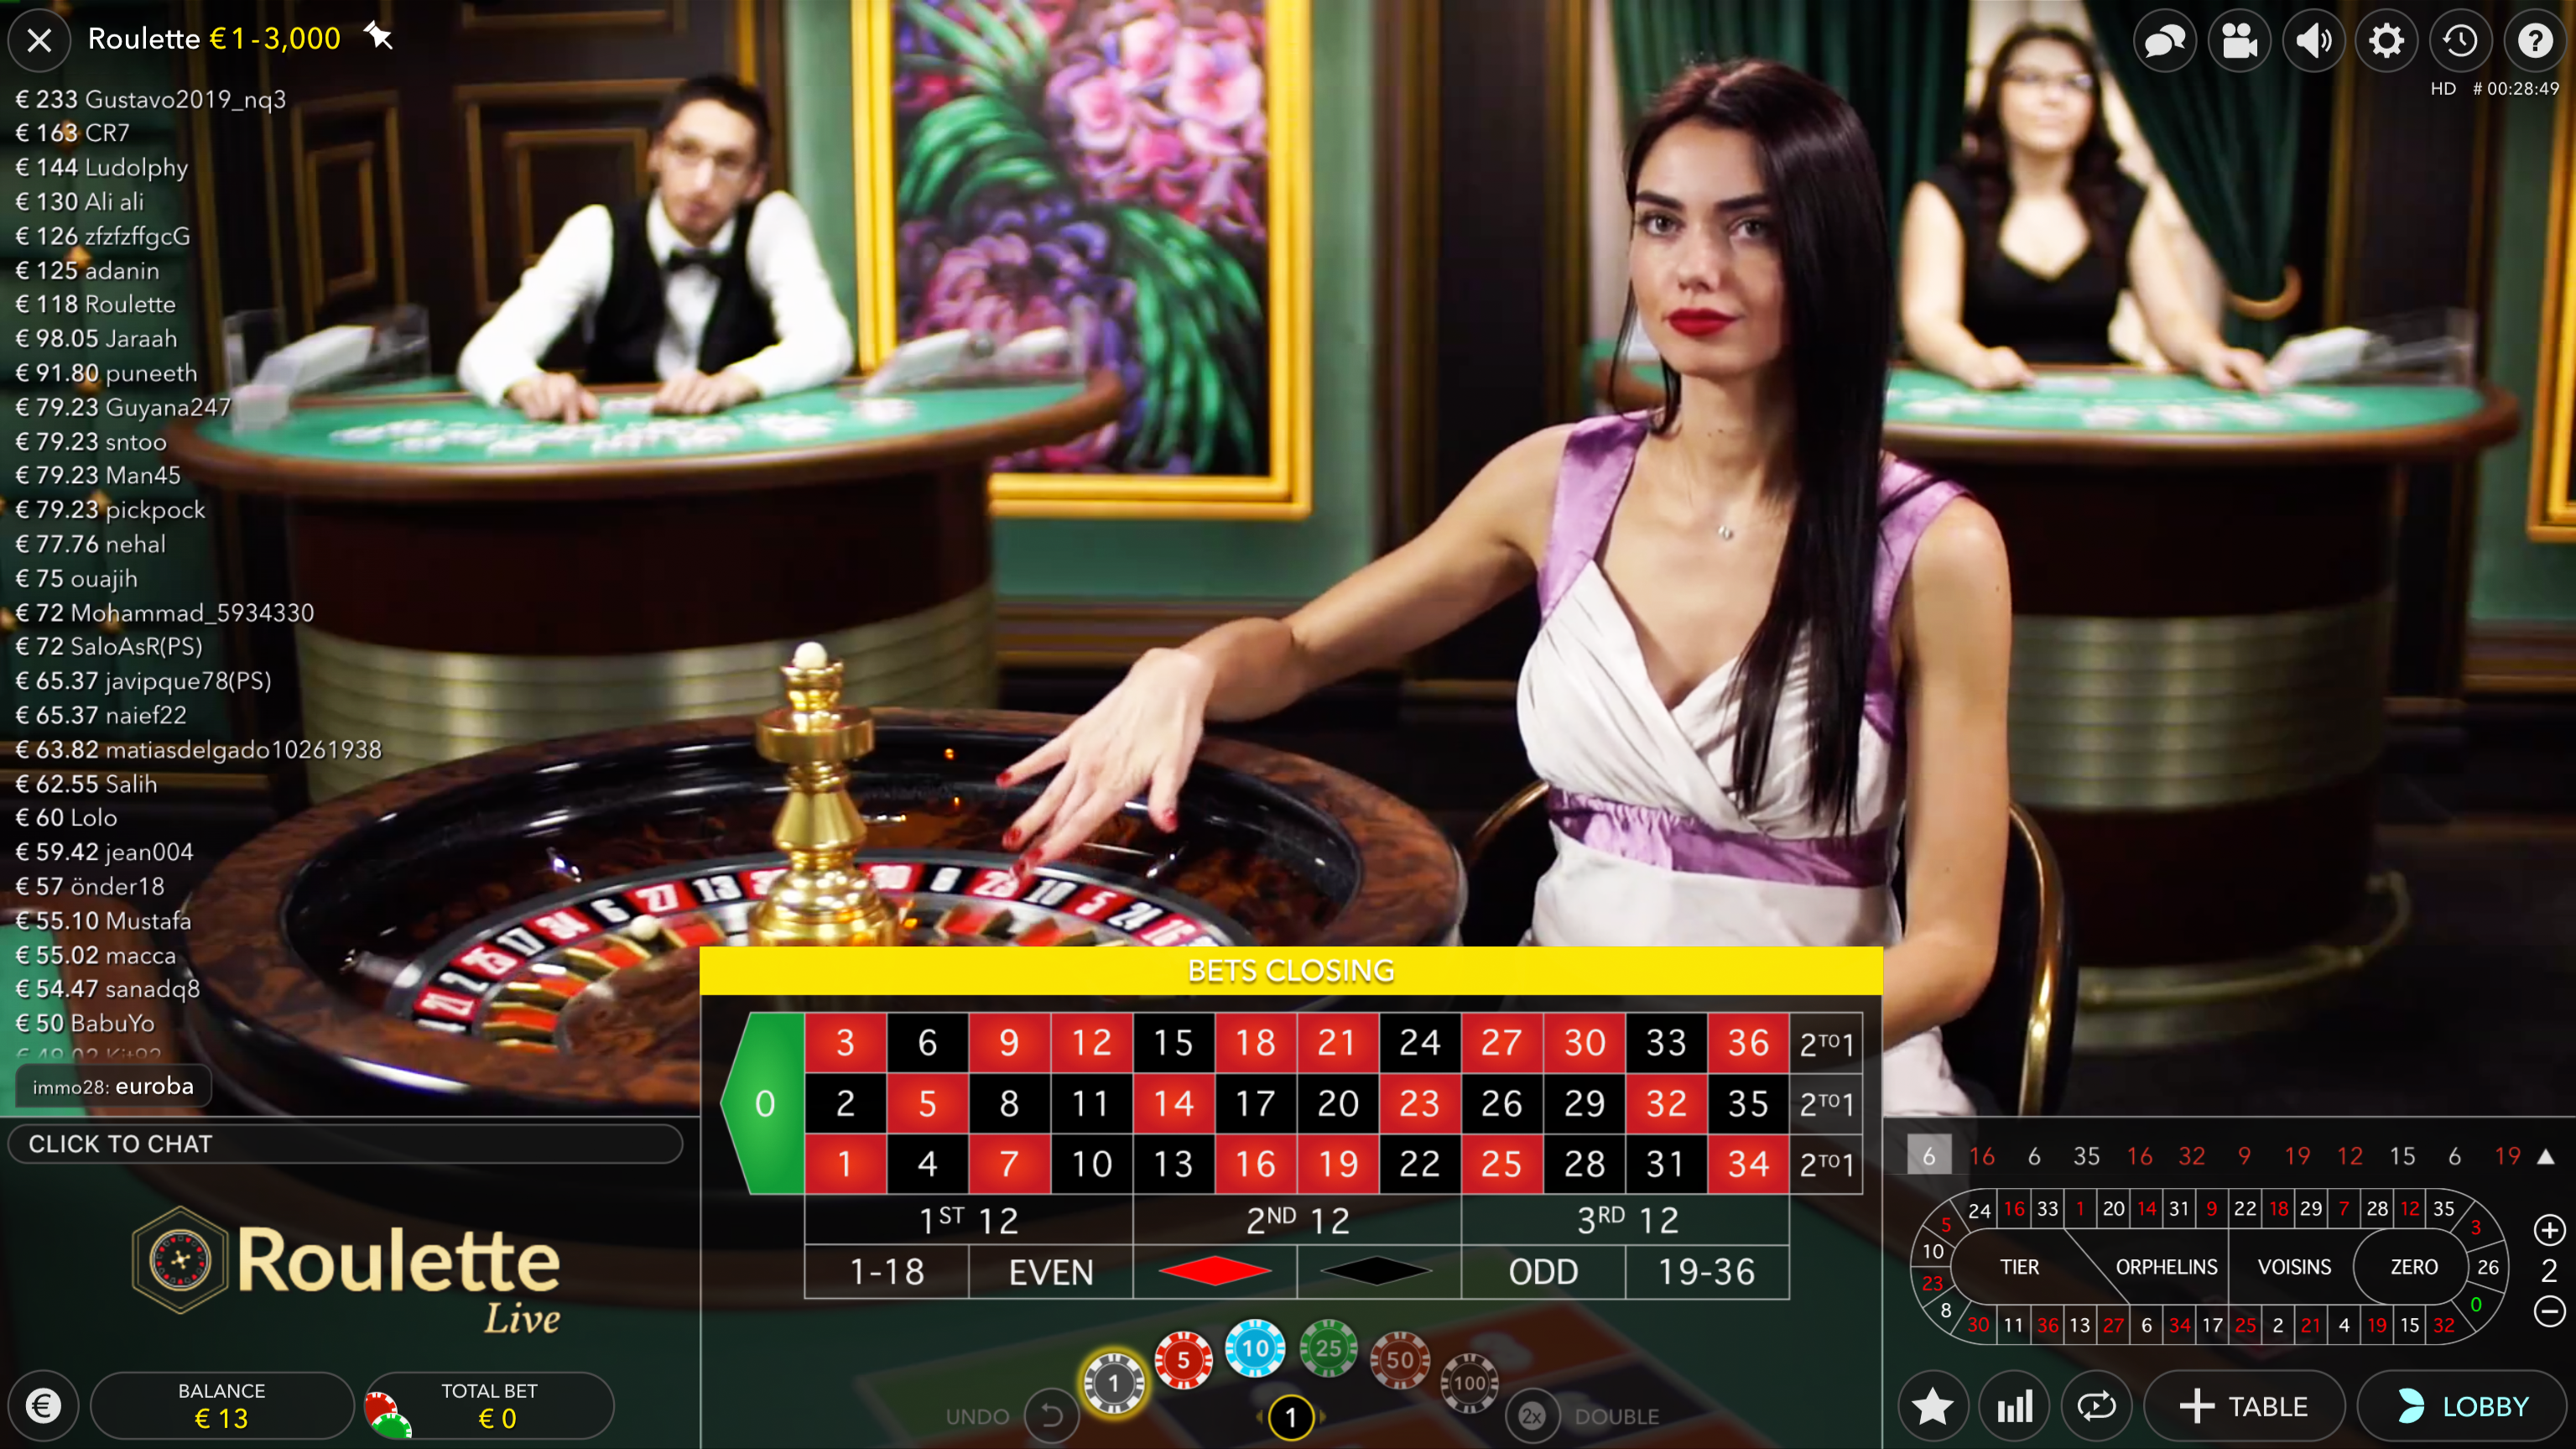 How To Play Online Casino In Brazil